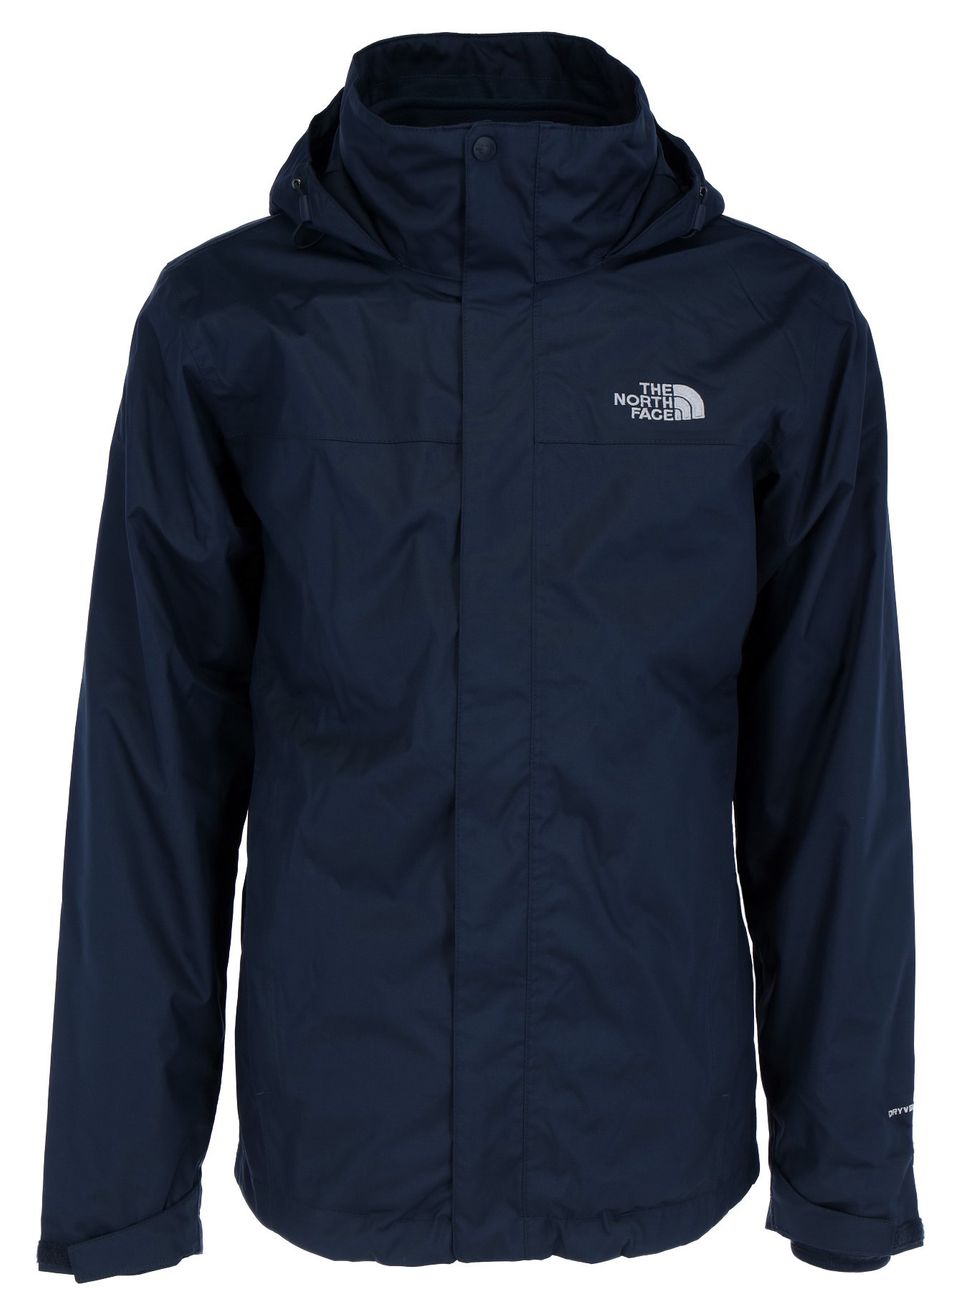 The North Face Evolve II Triclimate Herren Doppeljacke - The North Face - SAGATOO - 196248187433